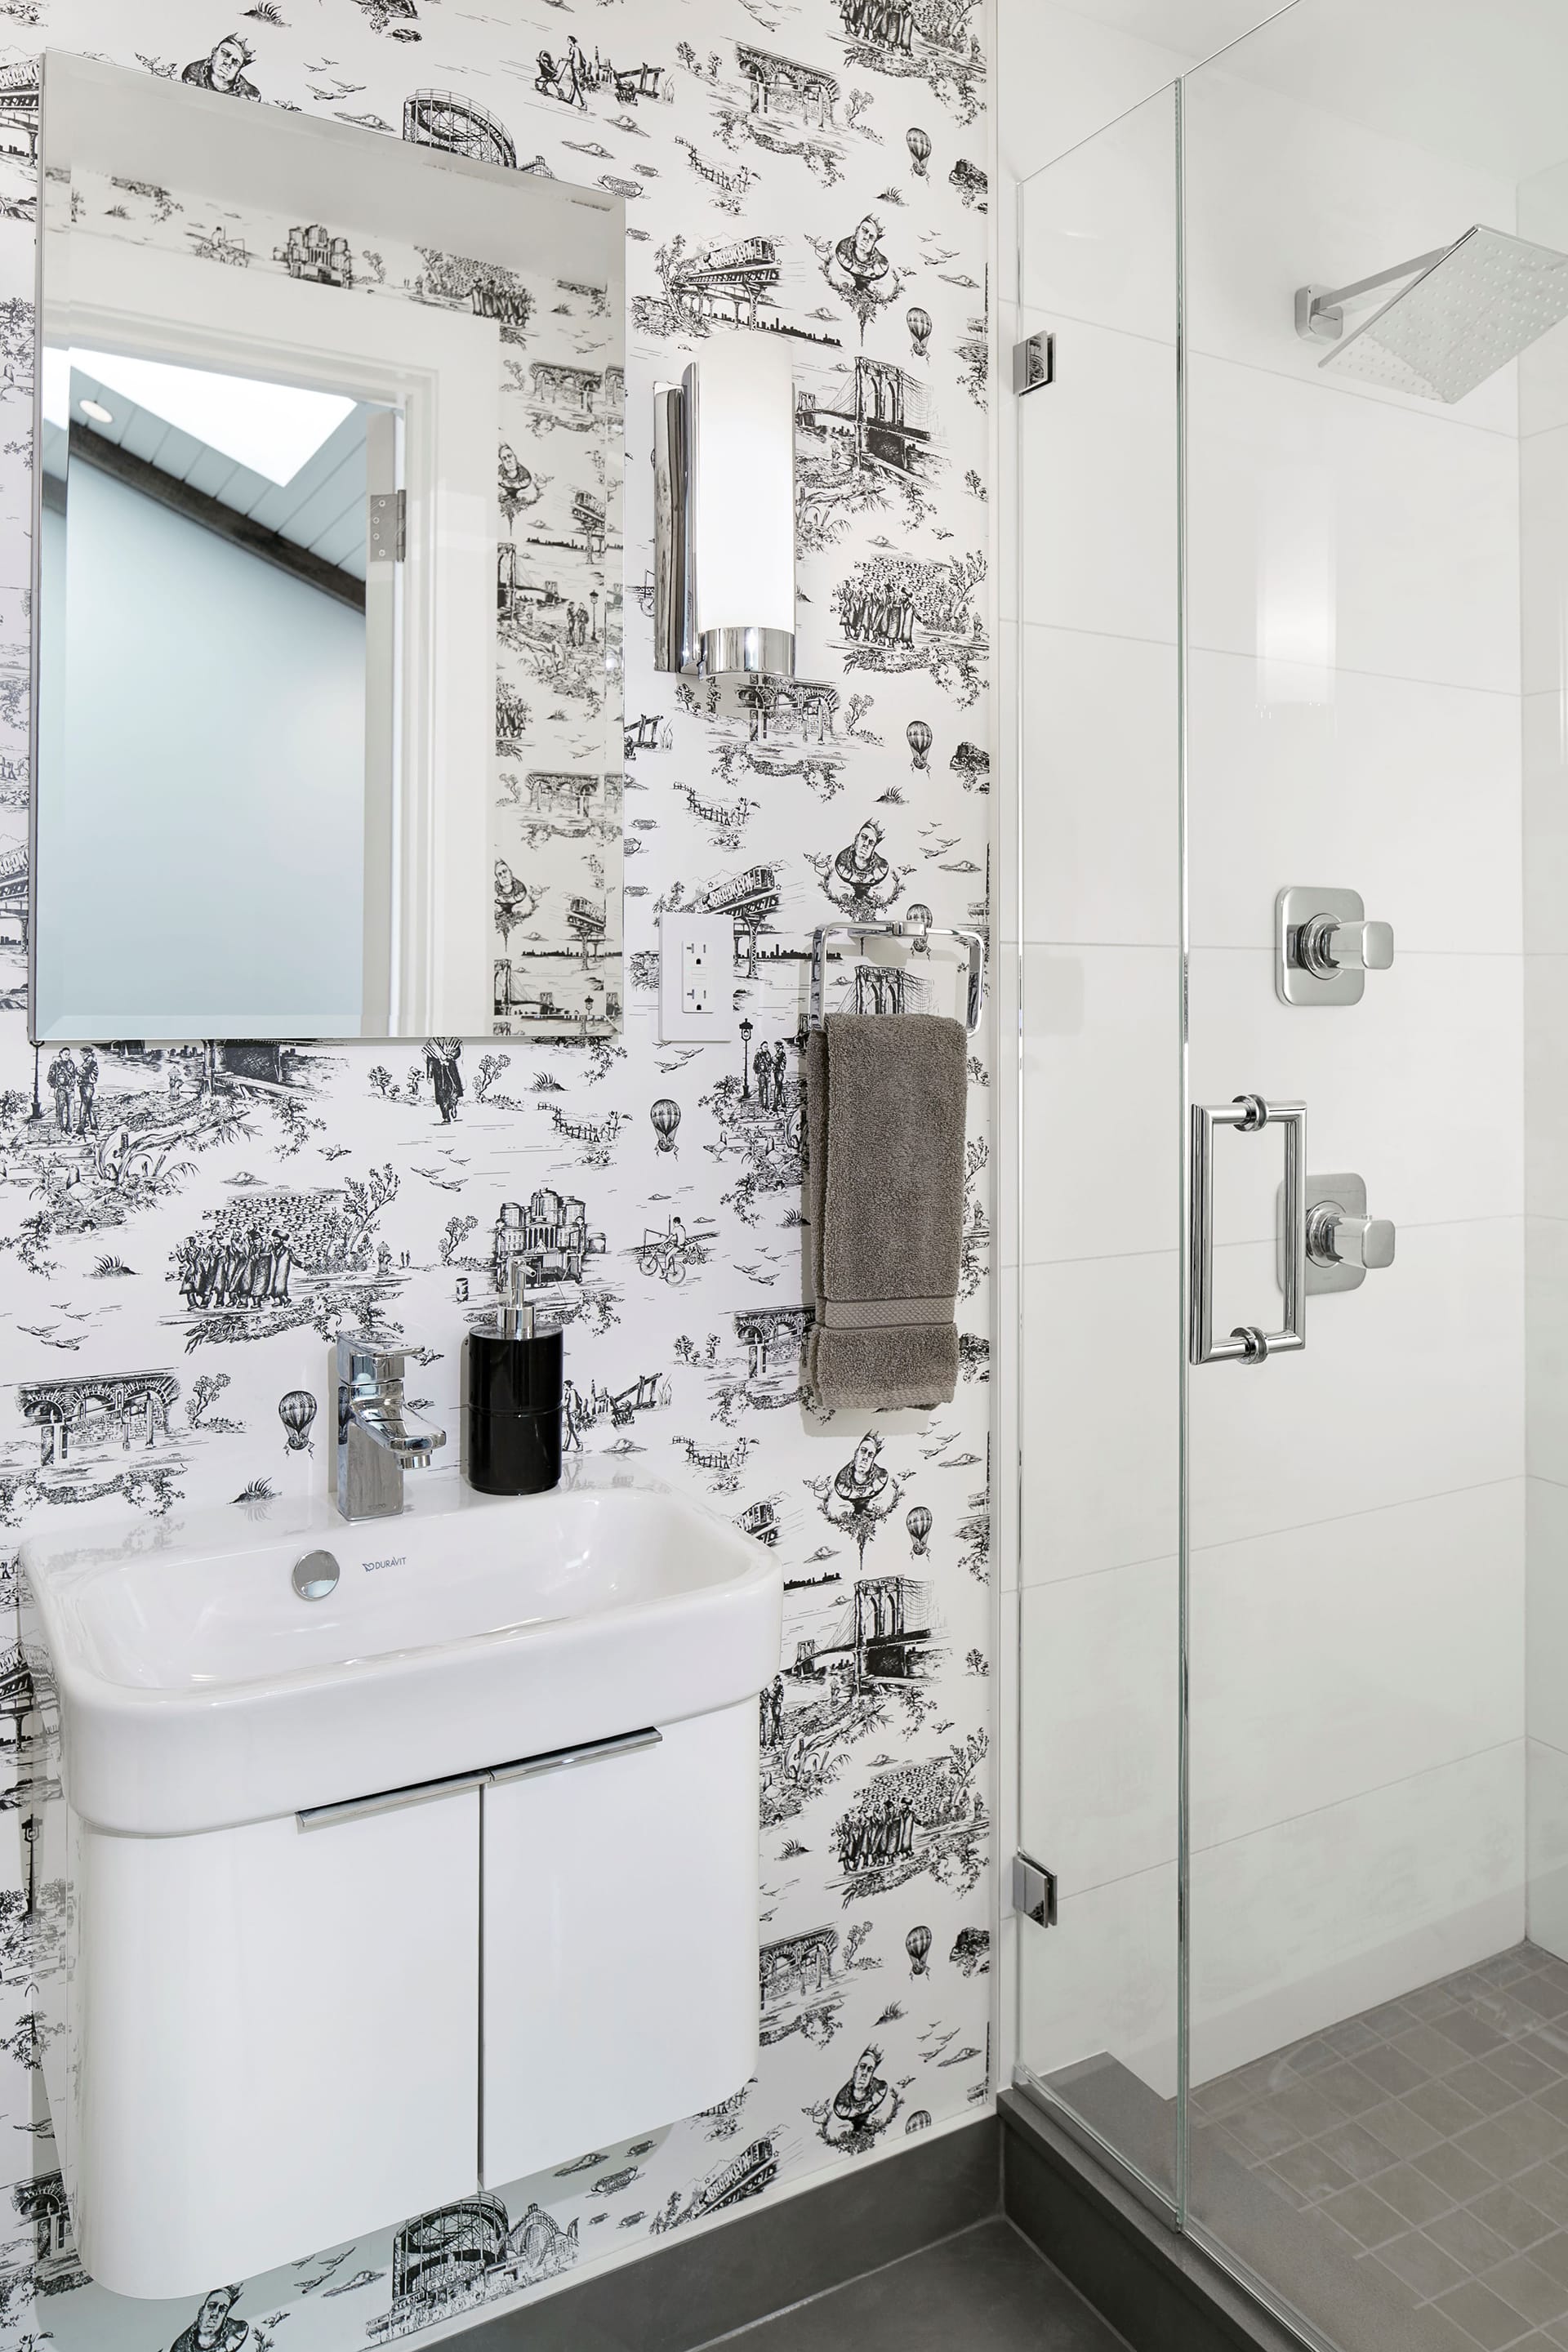 Bathroom with a shower stall, grey tile photos, and black and white patterned wallpaper.